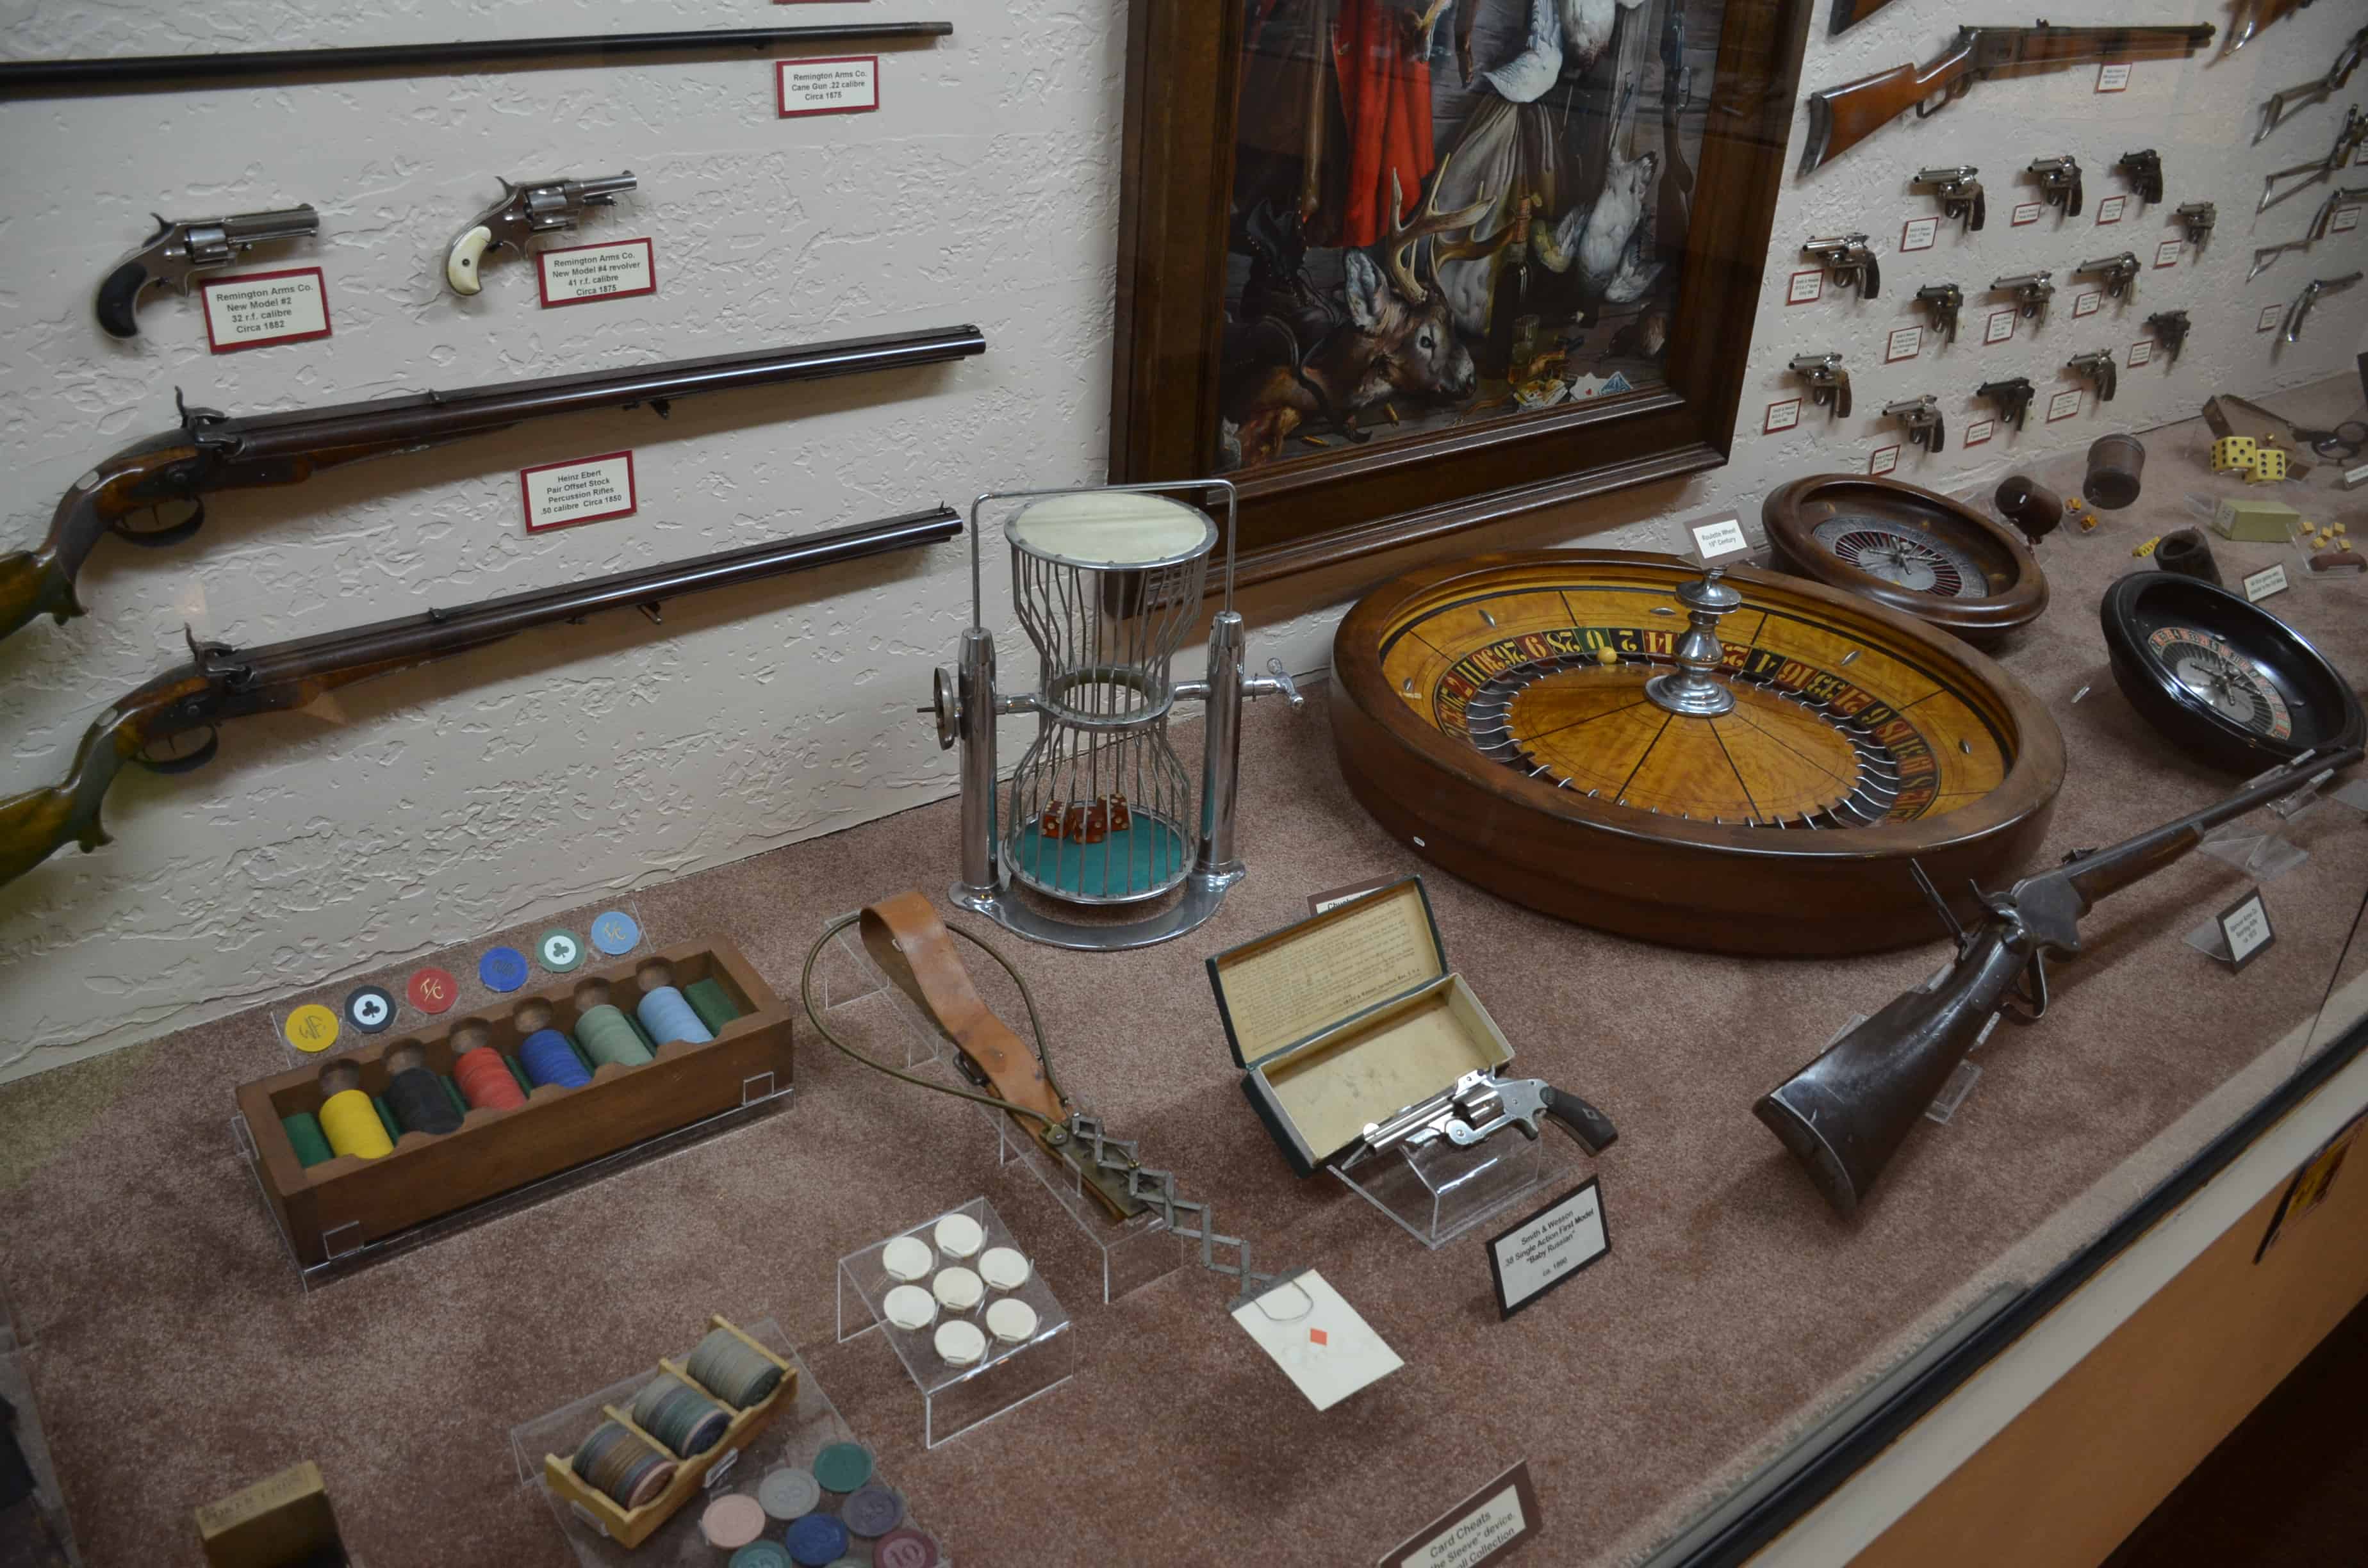 Gambling materials at the Nelson Museum of the West in Cheyenne, Wyoming